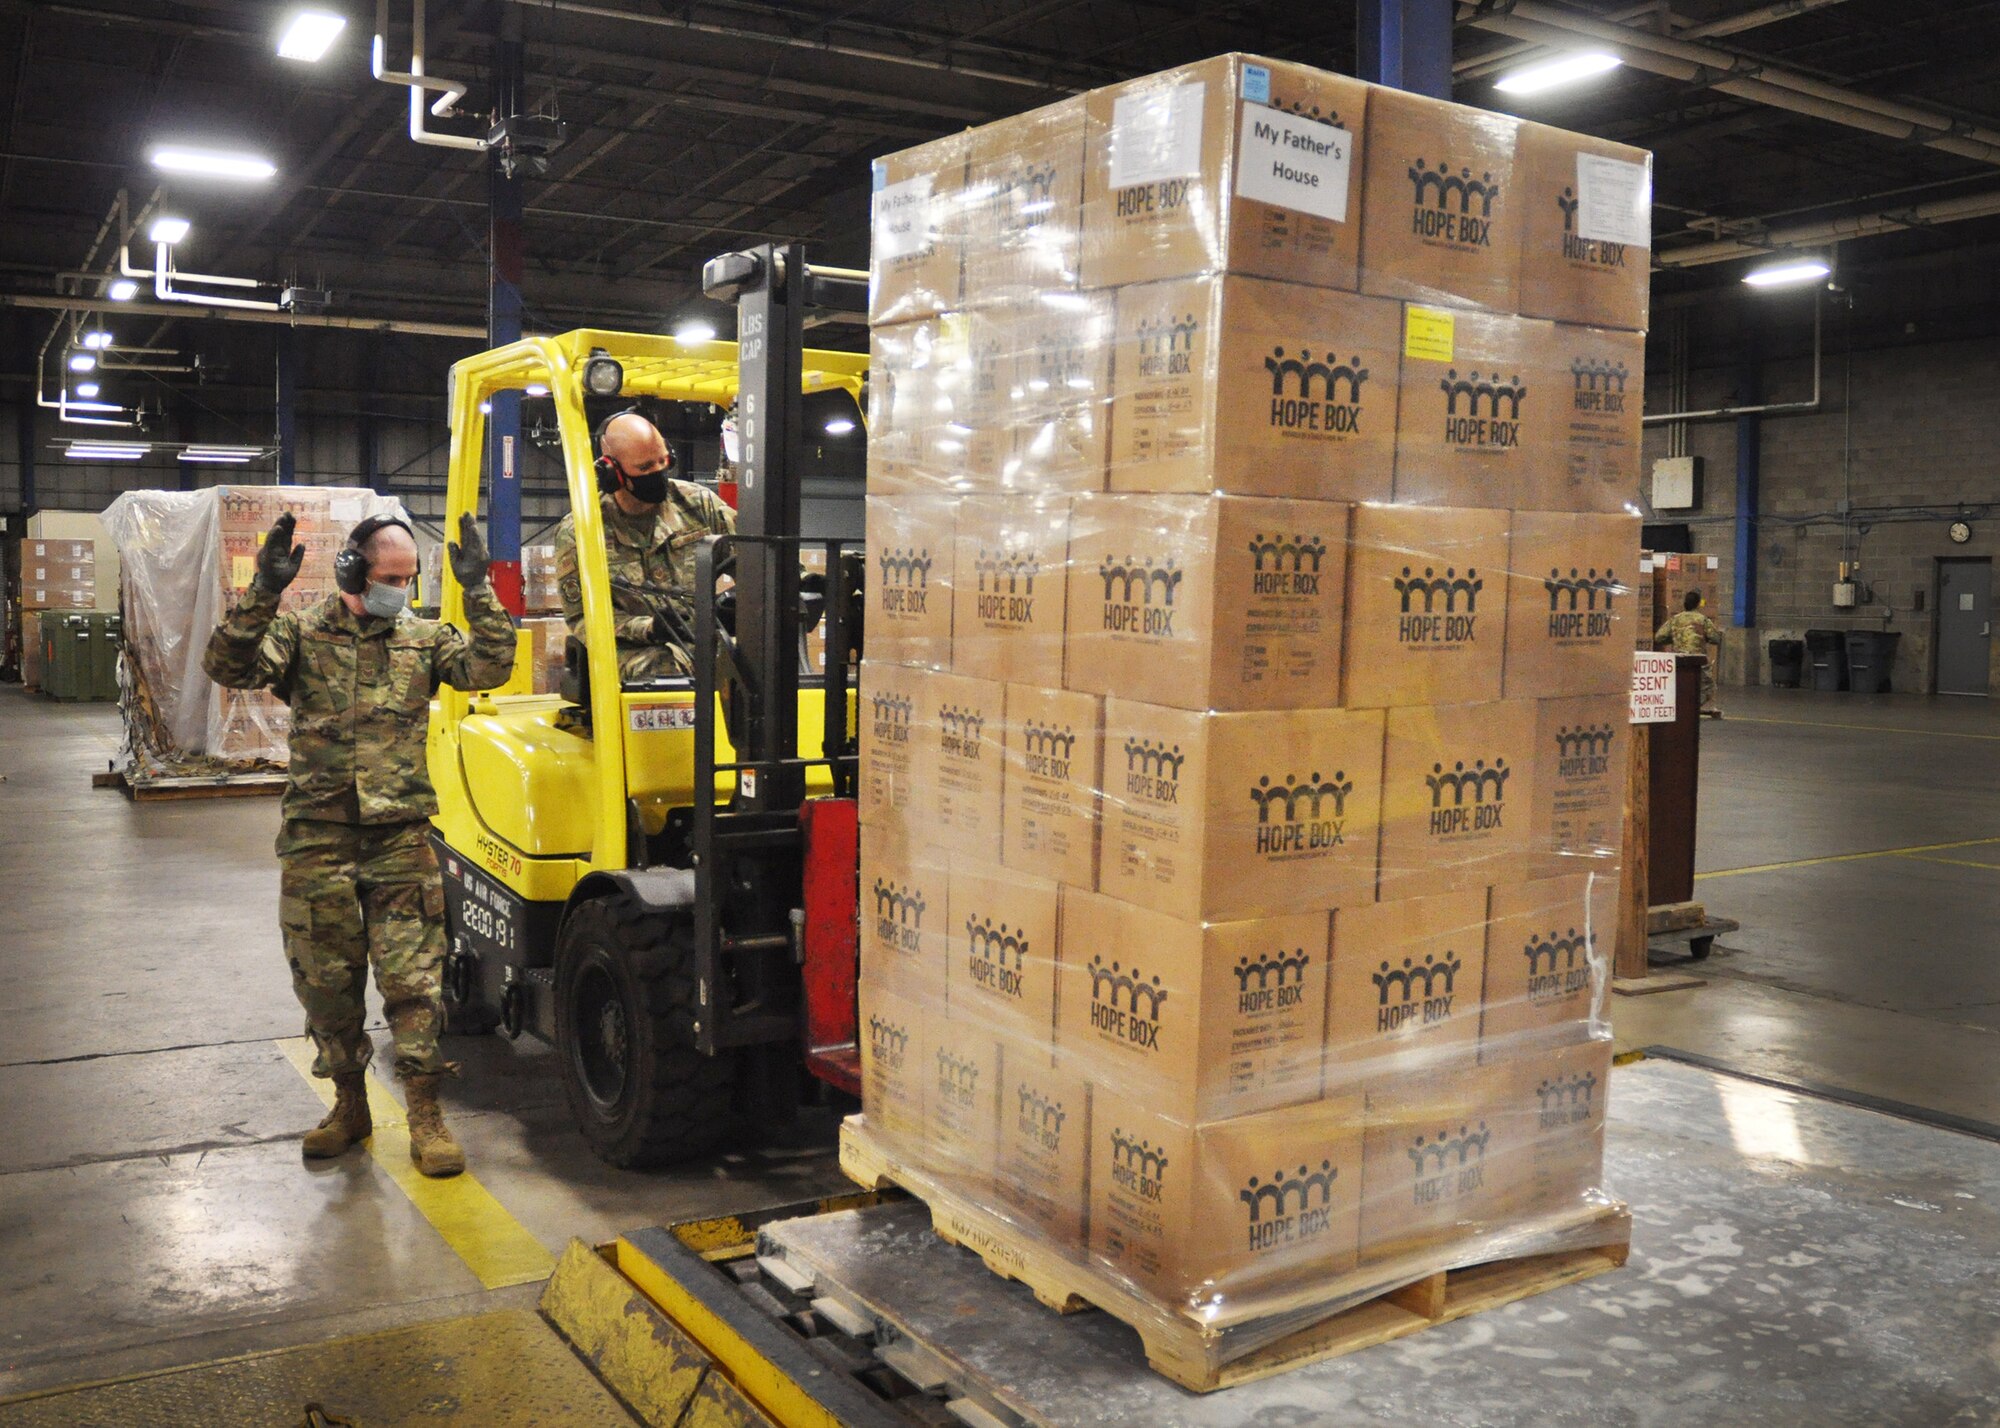 Staff Sgt. Matt Fehrman guides Staff Sgt. Kirk Laytart as he places a skid of 66 Hope Boxes onto a pallet in preparation for military airlift to Port-au-Prince, Haiti. The Hope Boxes, provided by A Child’s Hope International in Cincinnati, contain water filtration kits to purify a collective 30,000 gallons of water, as well as 64,000 meals. These Hope Boxes were handpacked in June and have a shelf life on three years. Airlifted on a space-available basis as part of the Denton program, the boxes will be picked up by nonprofit agencies in Haiti and distributed to children and families.